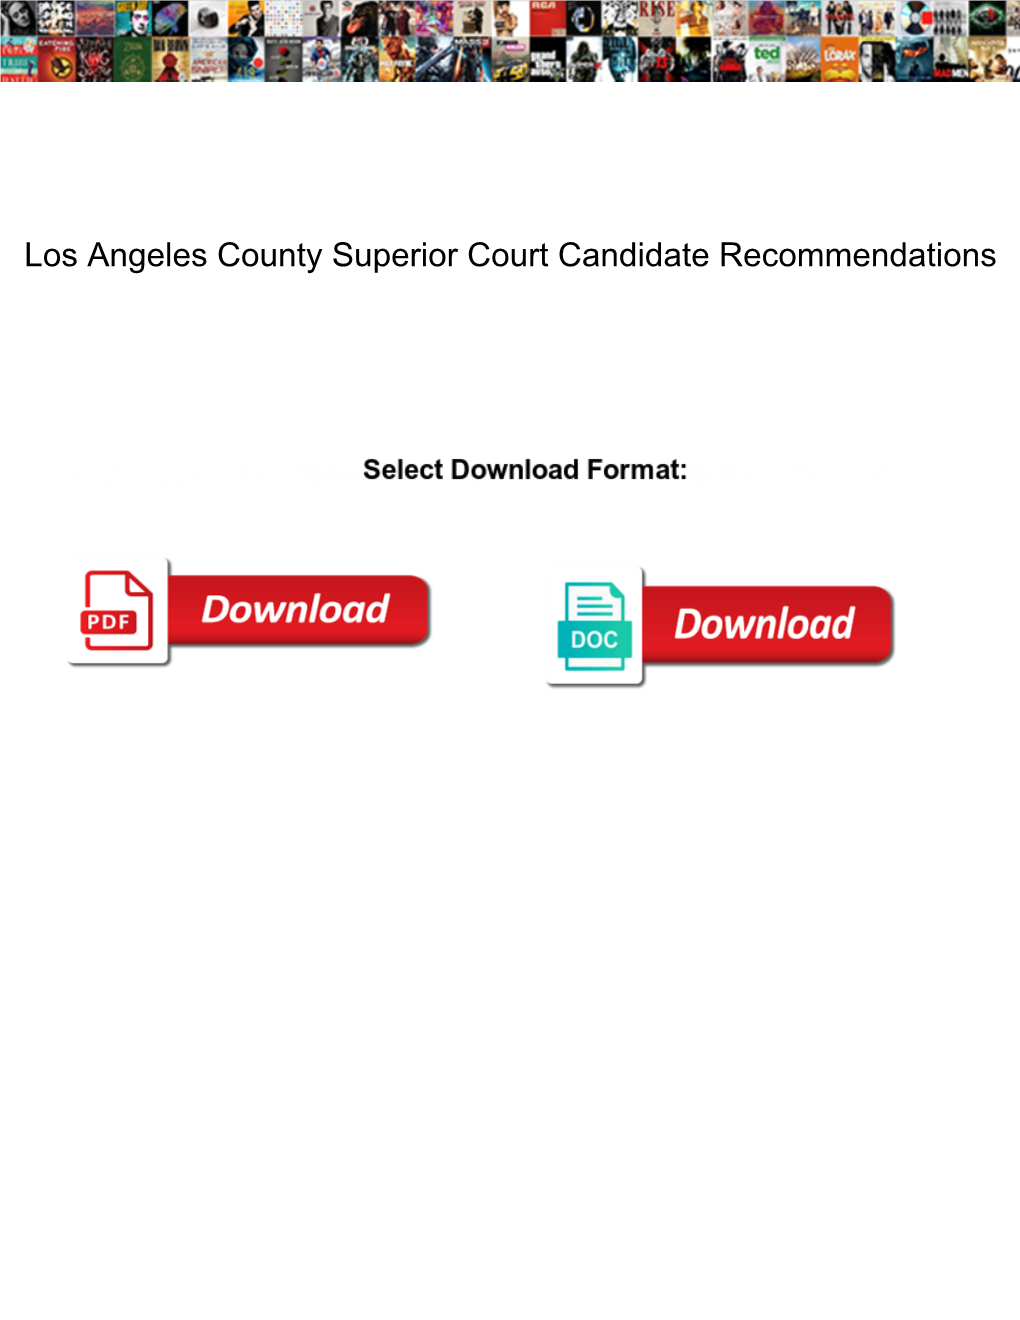 Los Angeles County Superior Court Candidate Recommendations